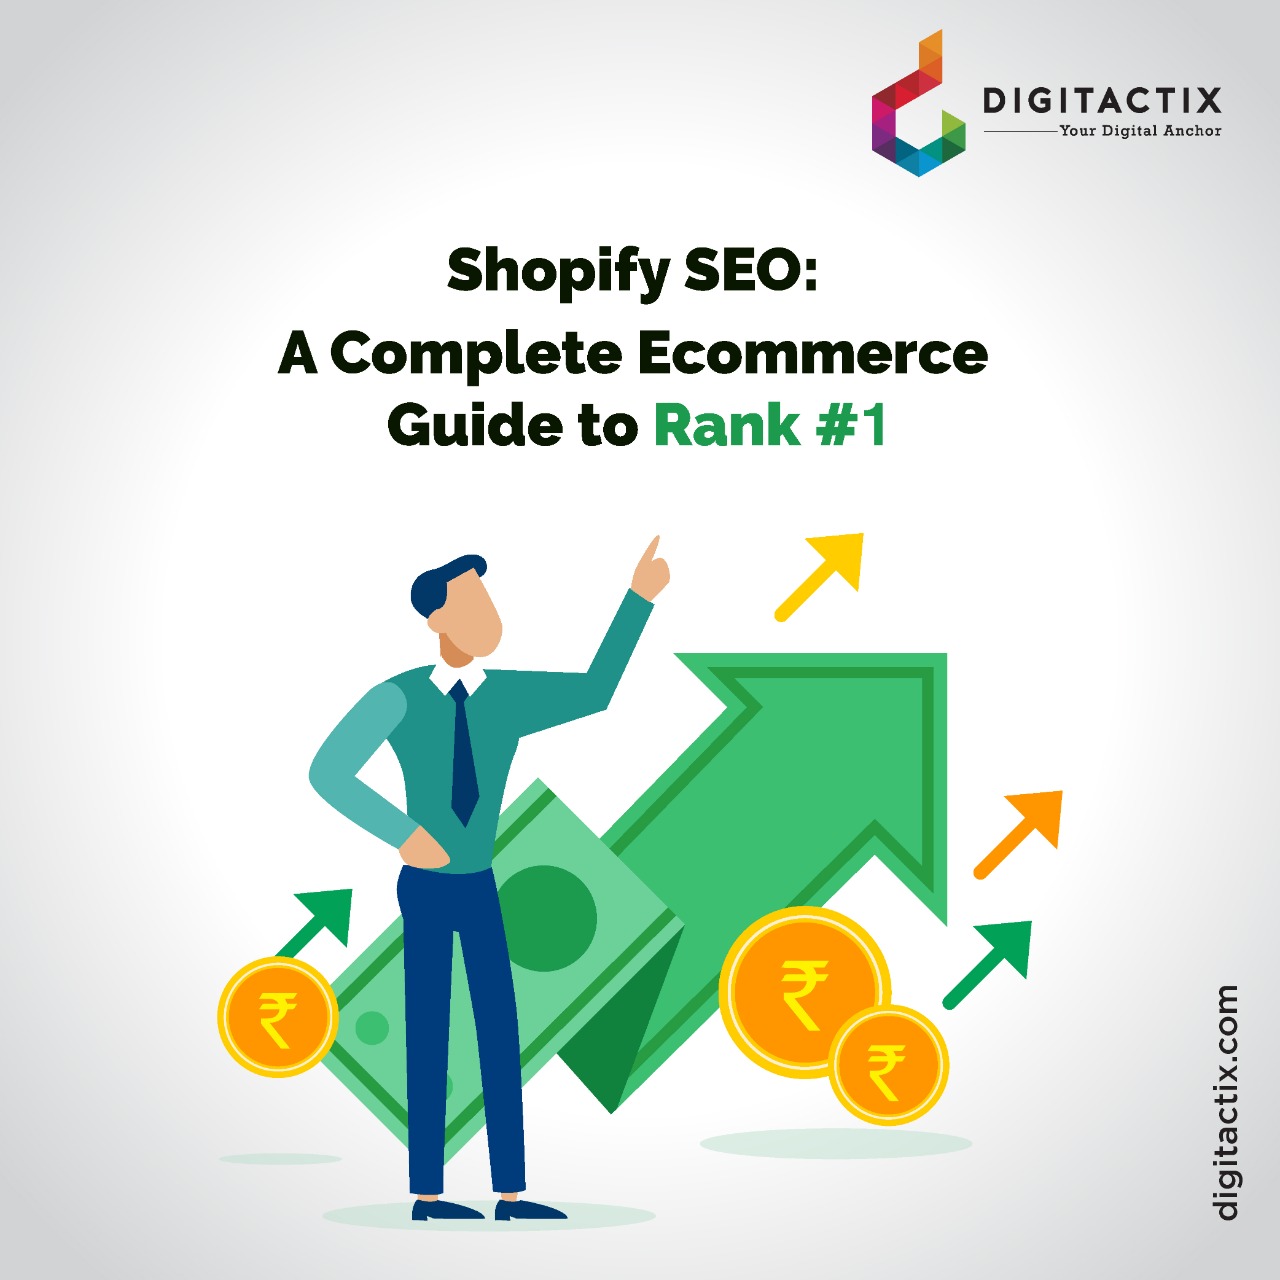 Shopify SEO: A Complete Ecommerce Guide